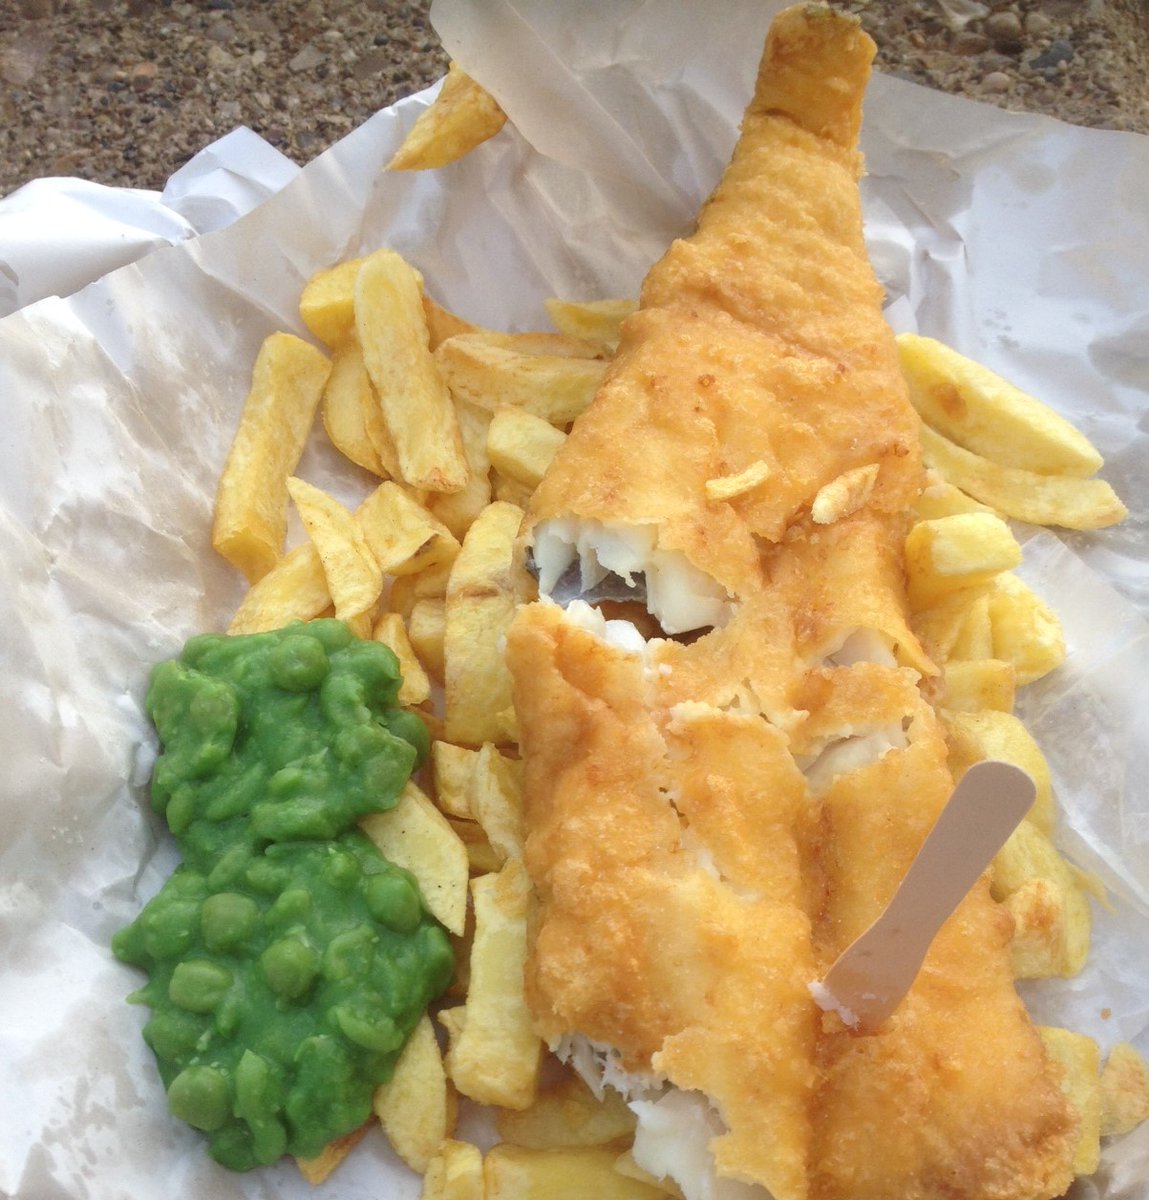 do you prefer eating your chips and mushy peas in a tray or in paper?